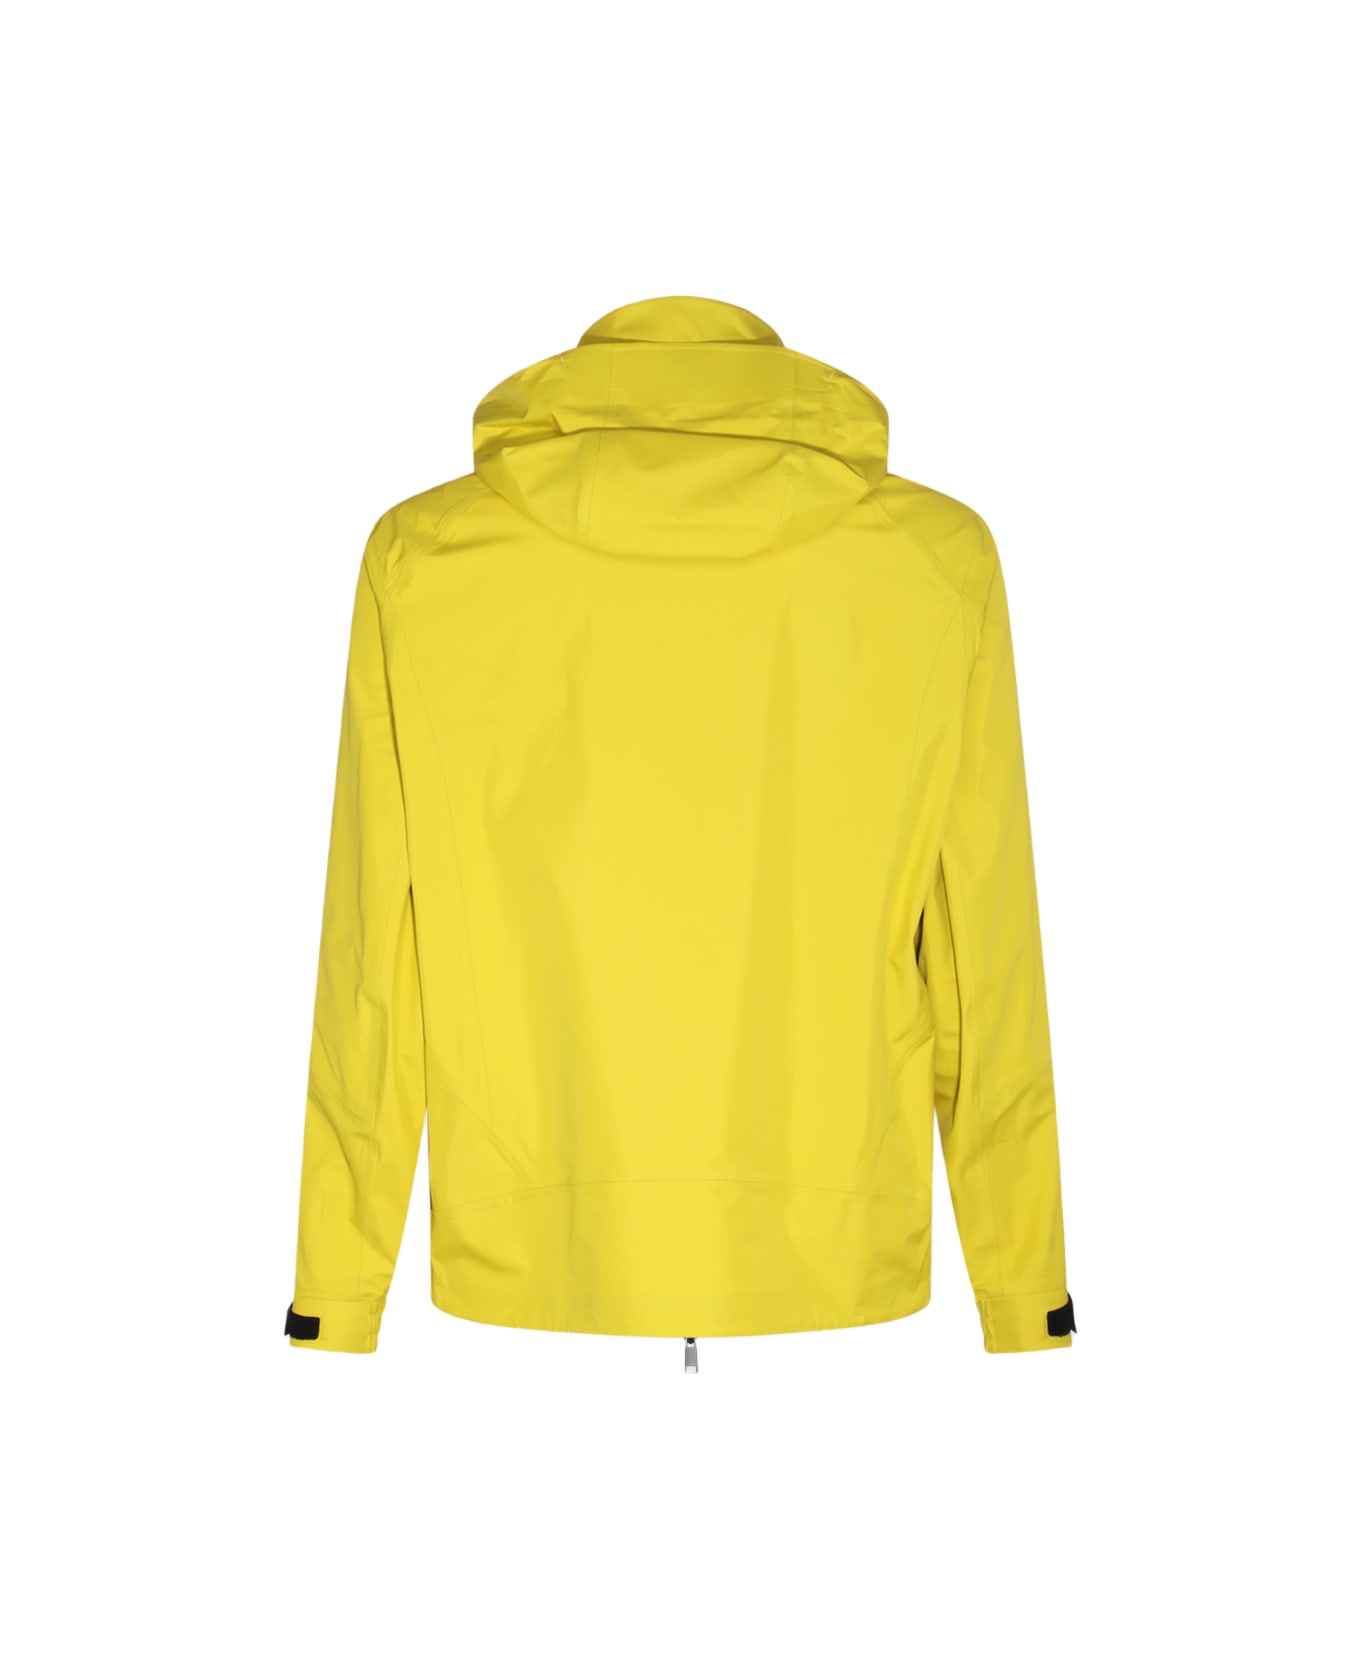 Zegna Yellow Cotton Casual Jacket - 722